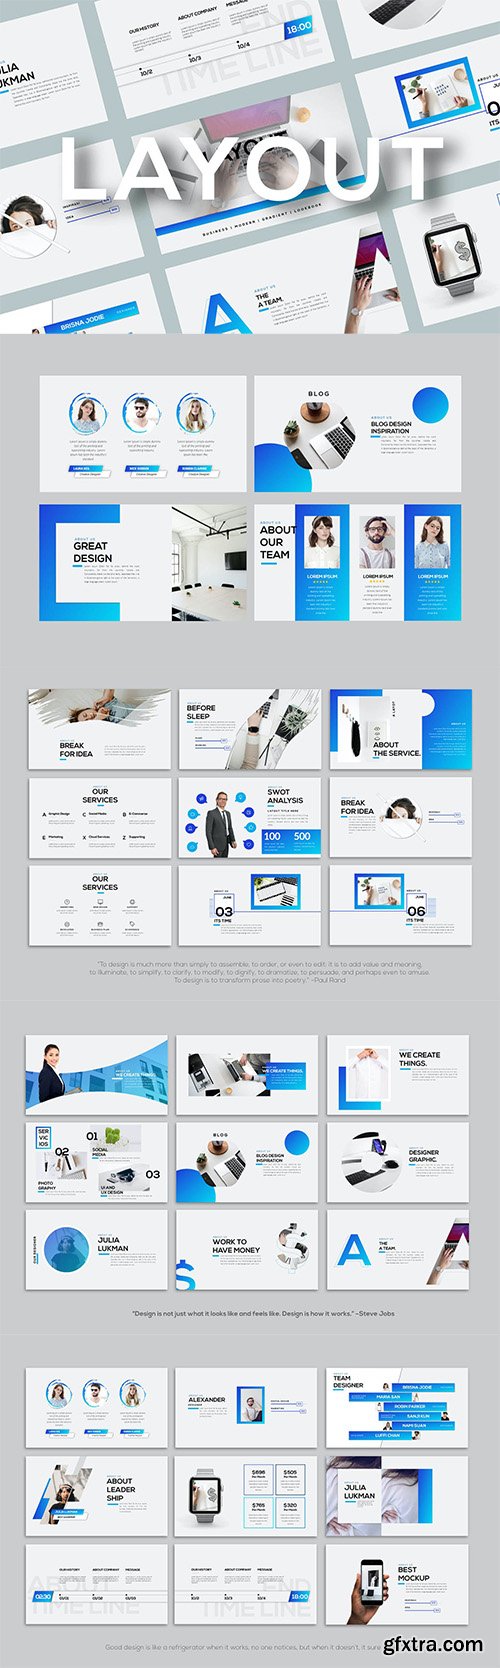 Layout - Powerpoint Template